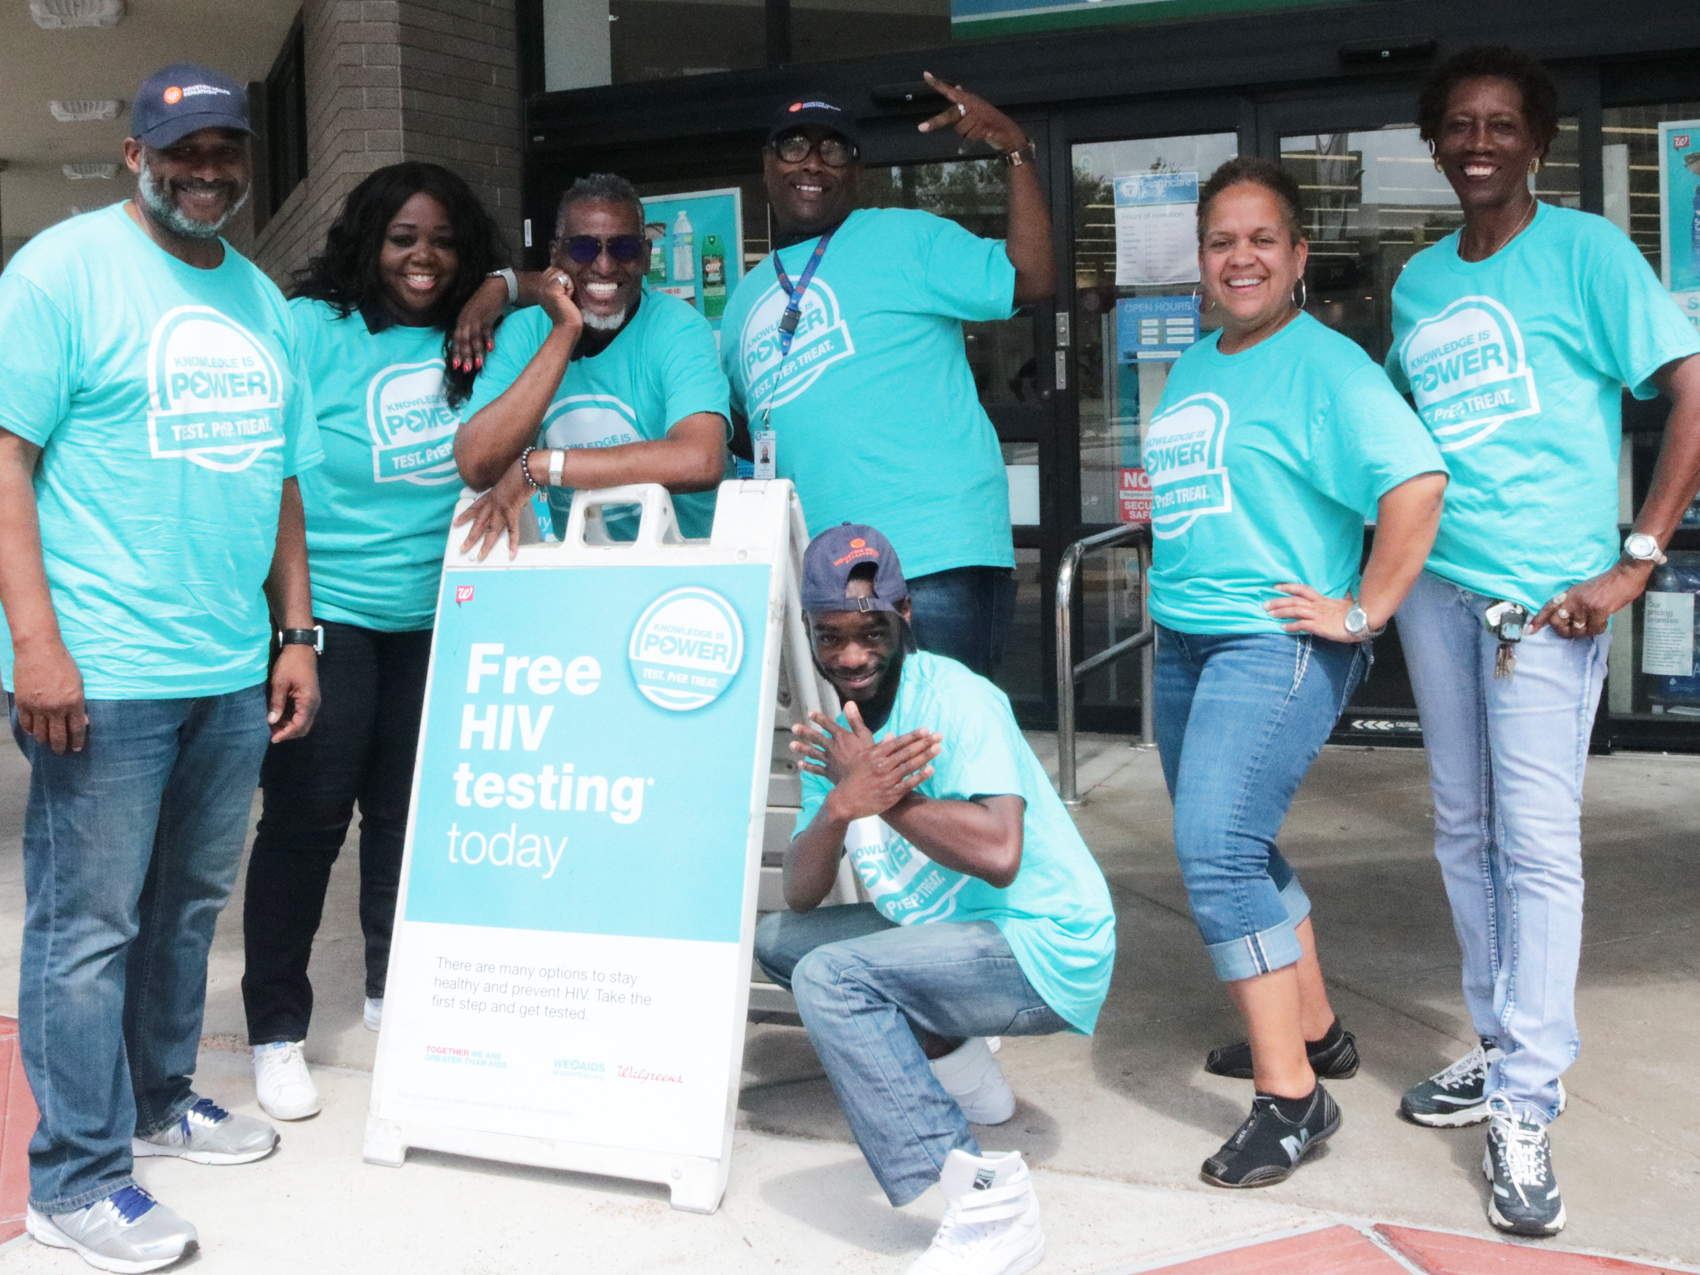 People standing with Free HIV testing sign